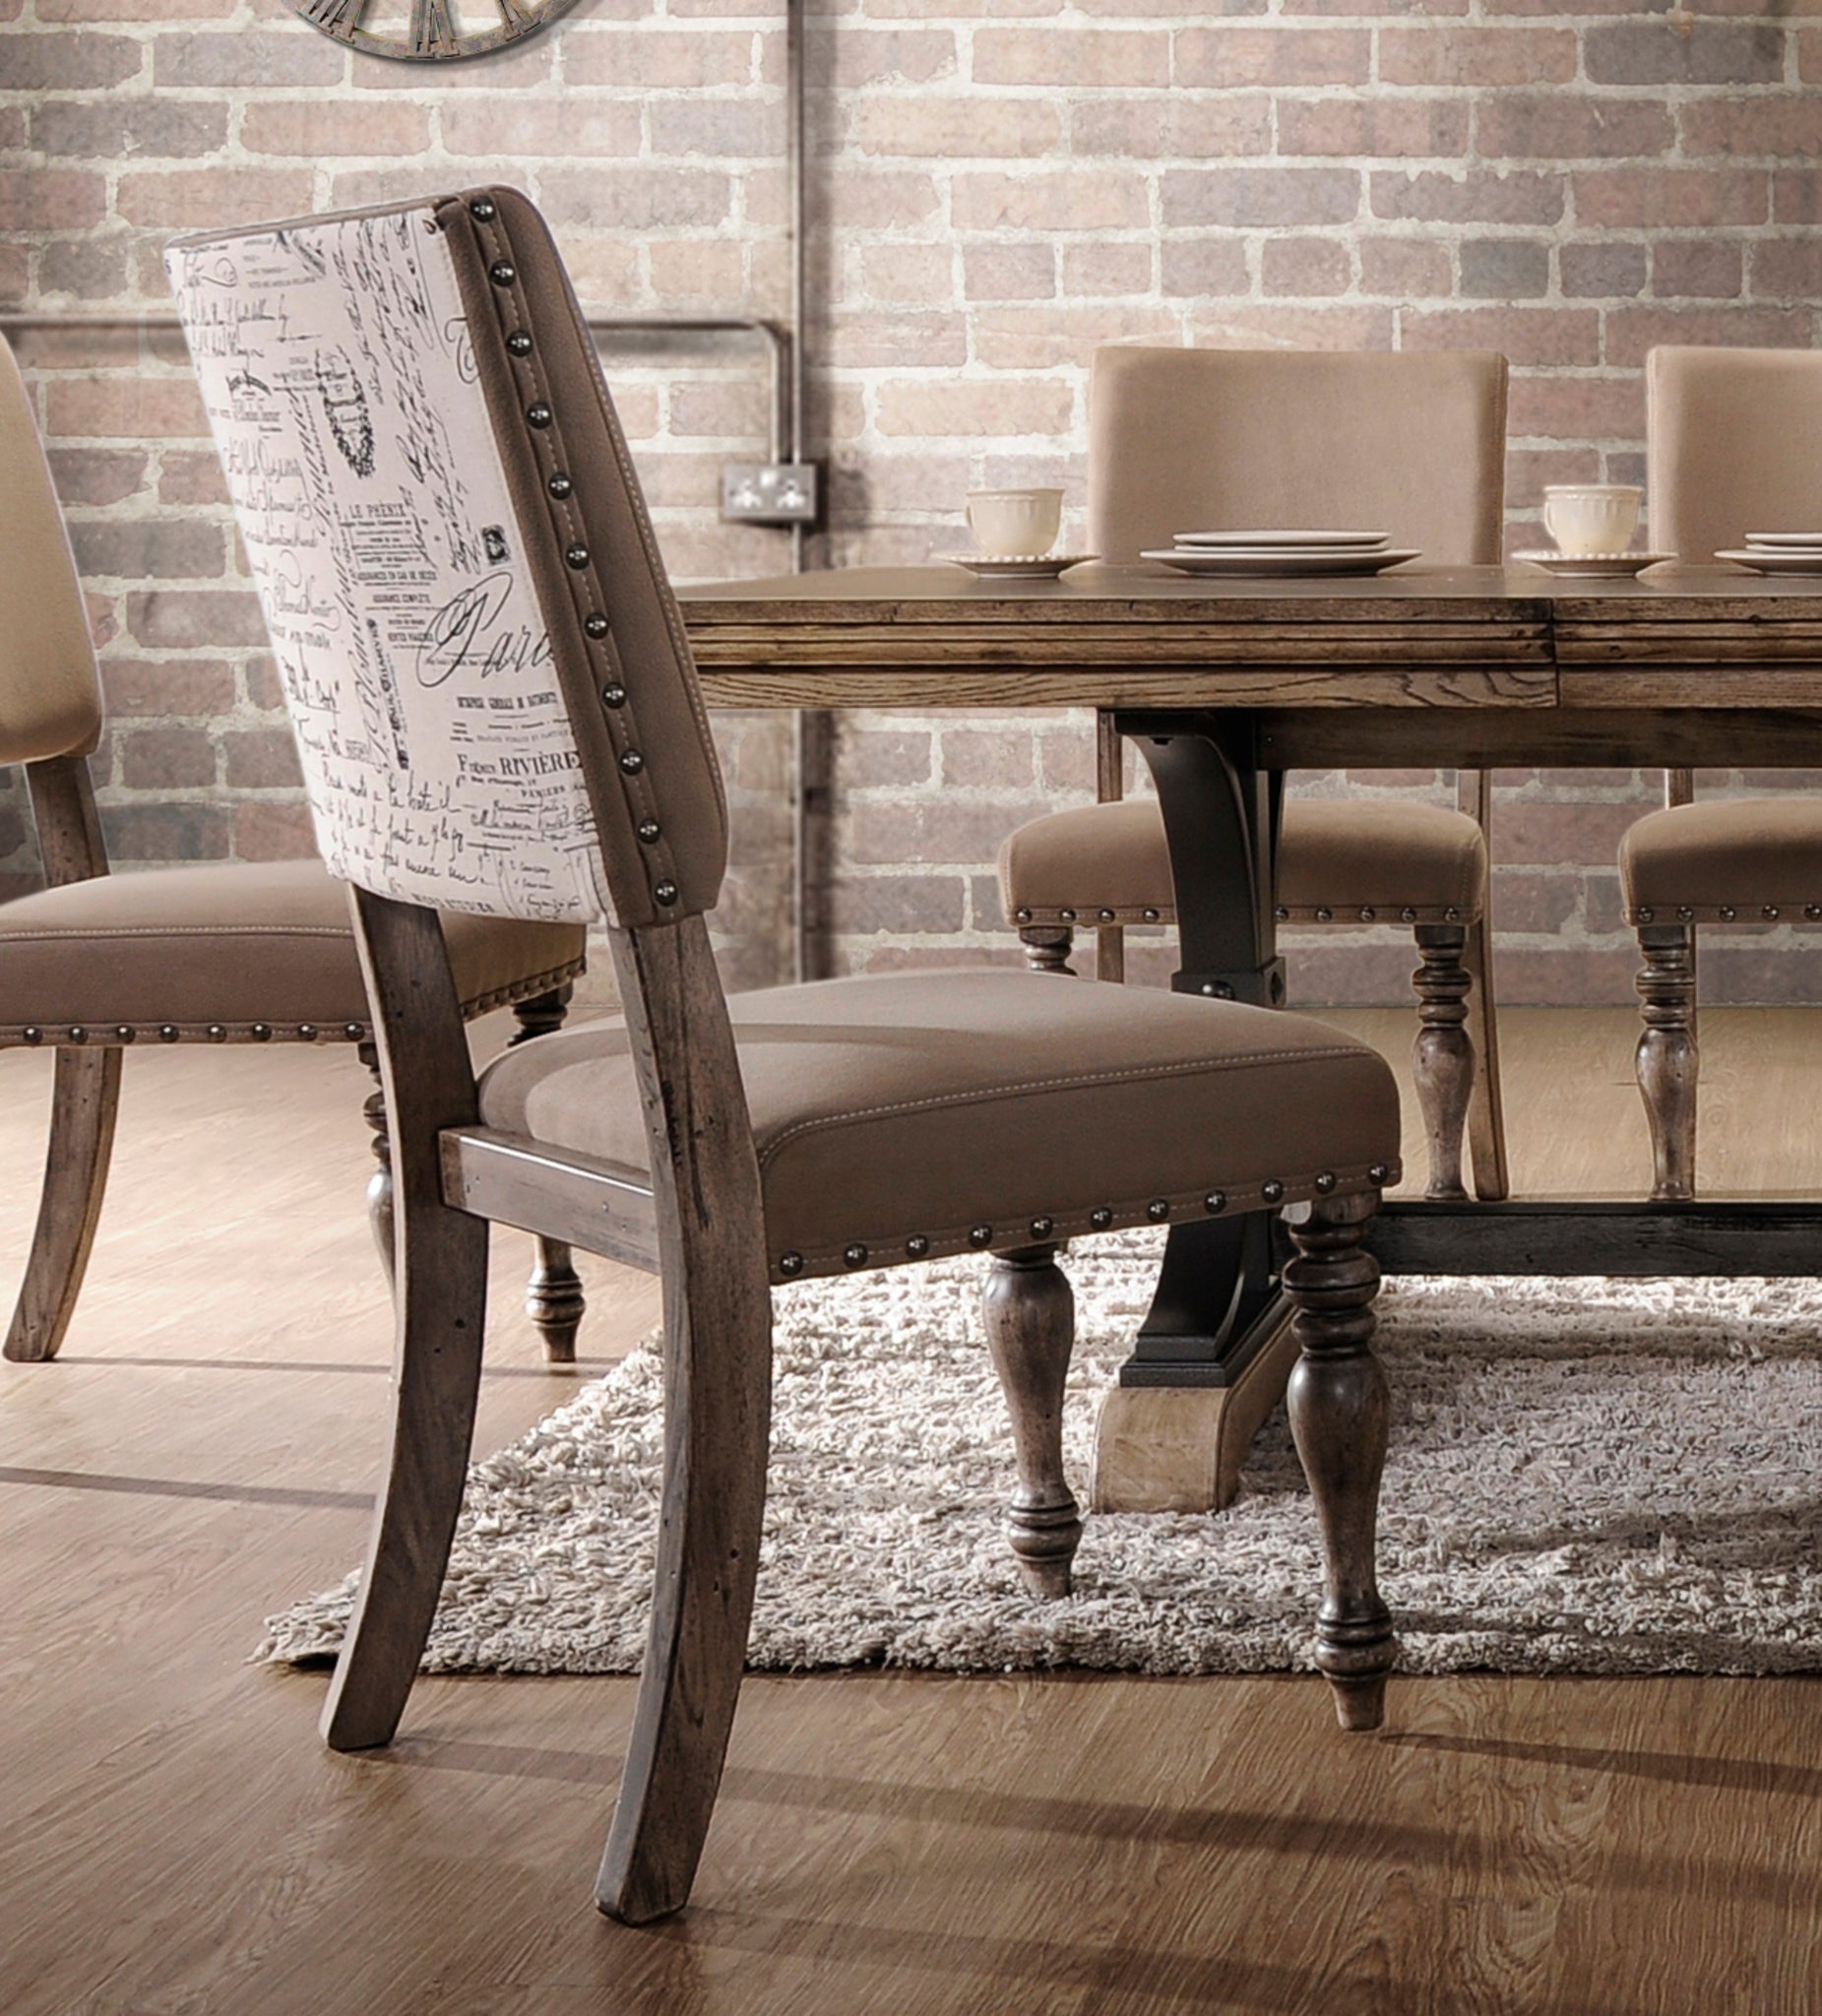 Birmingham 9-piece Driftwood Finish Table with Nail Head Chairs Dining